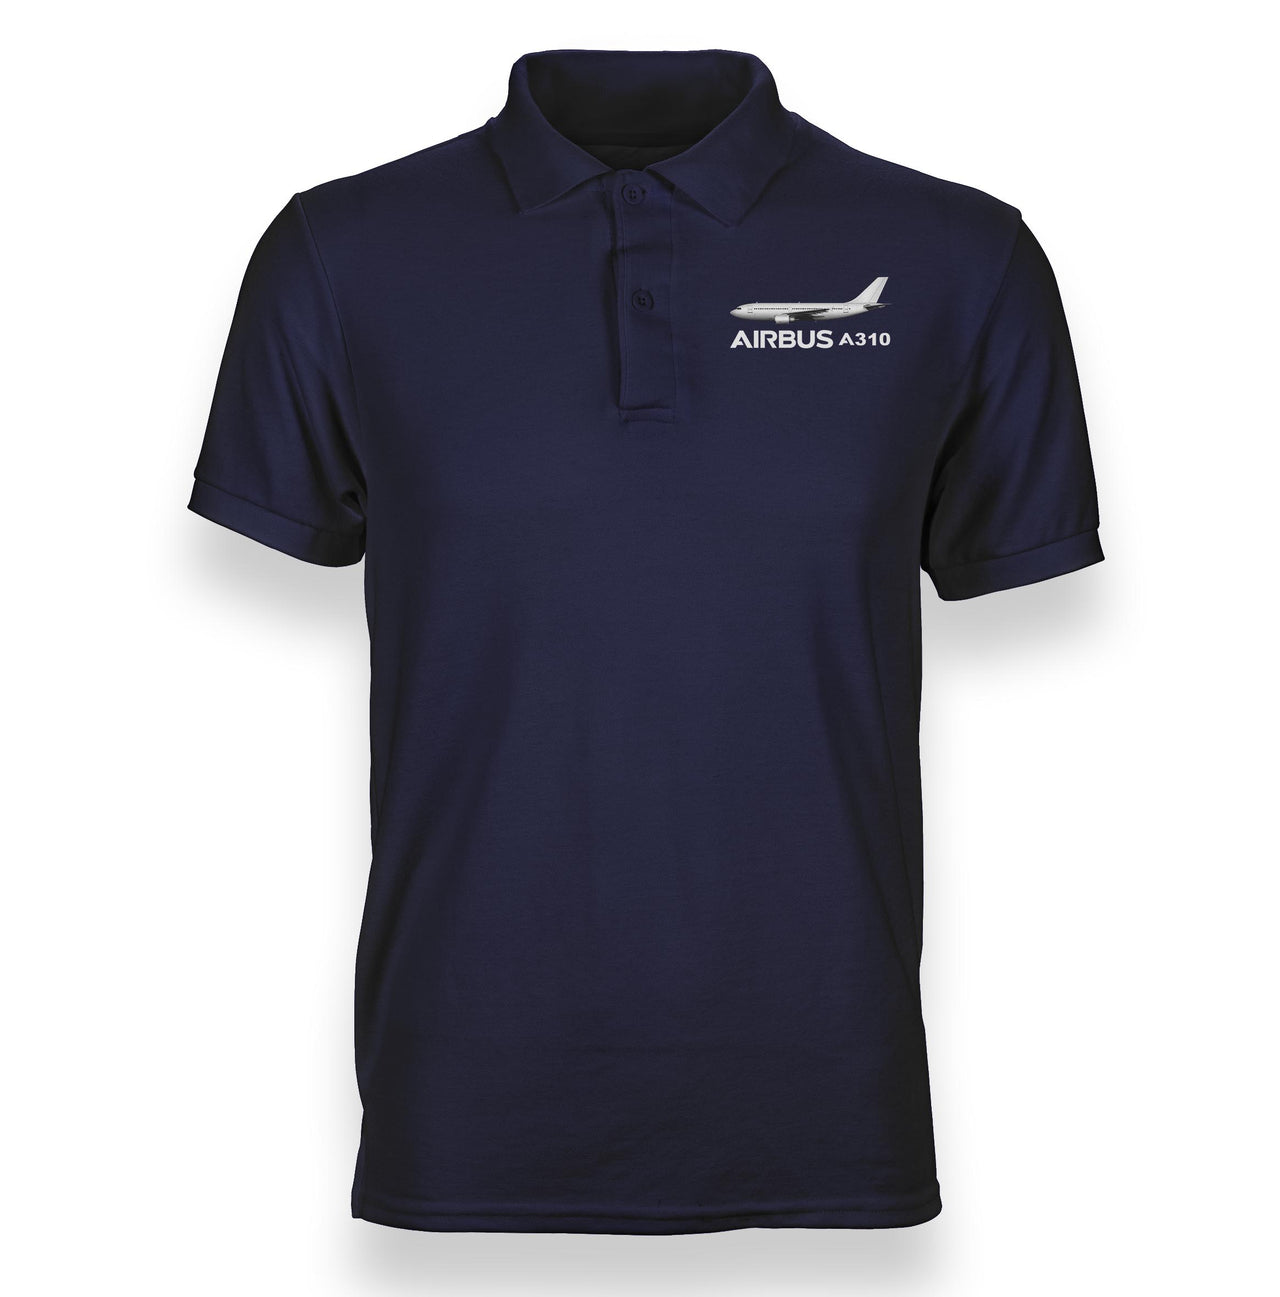 The Airbus A310 Designed Polo T-Shirts